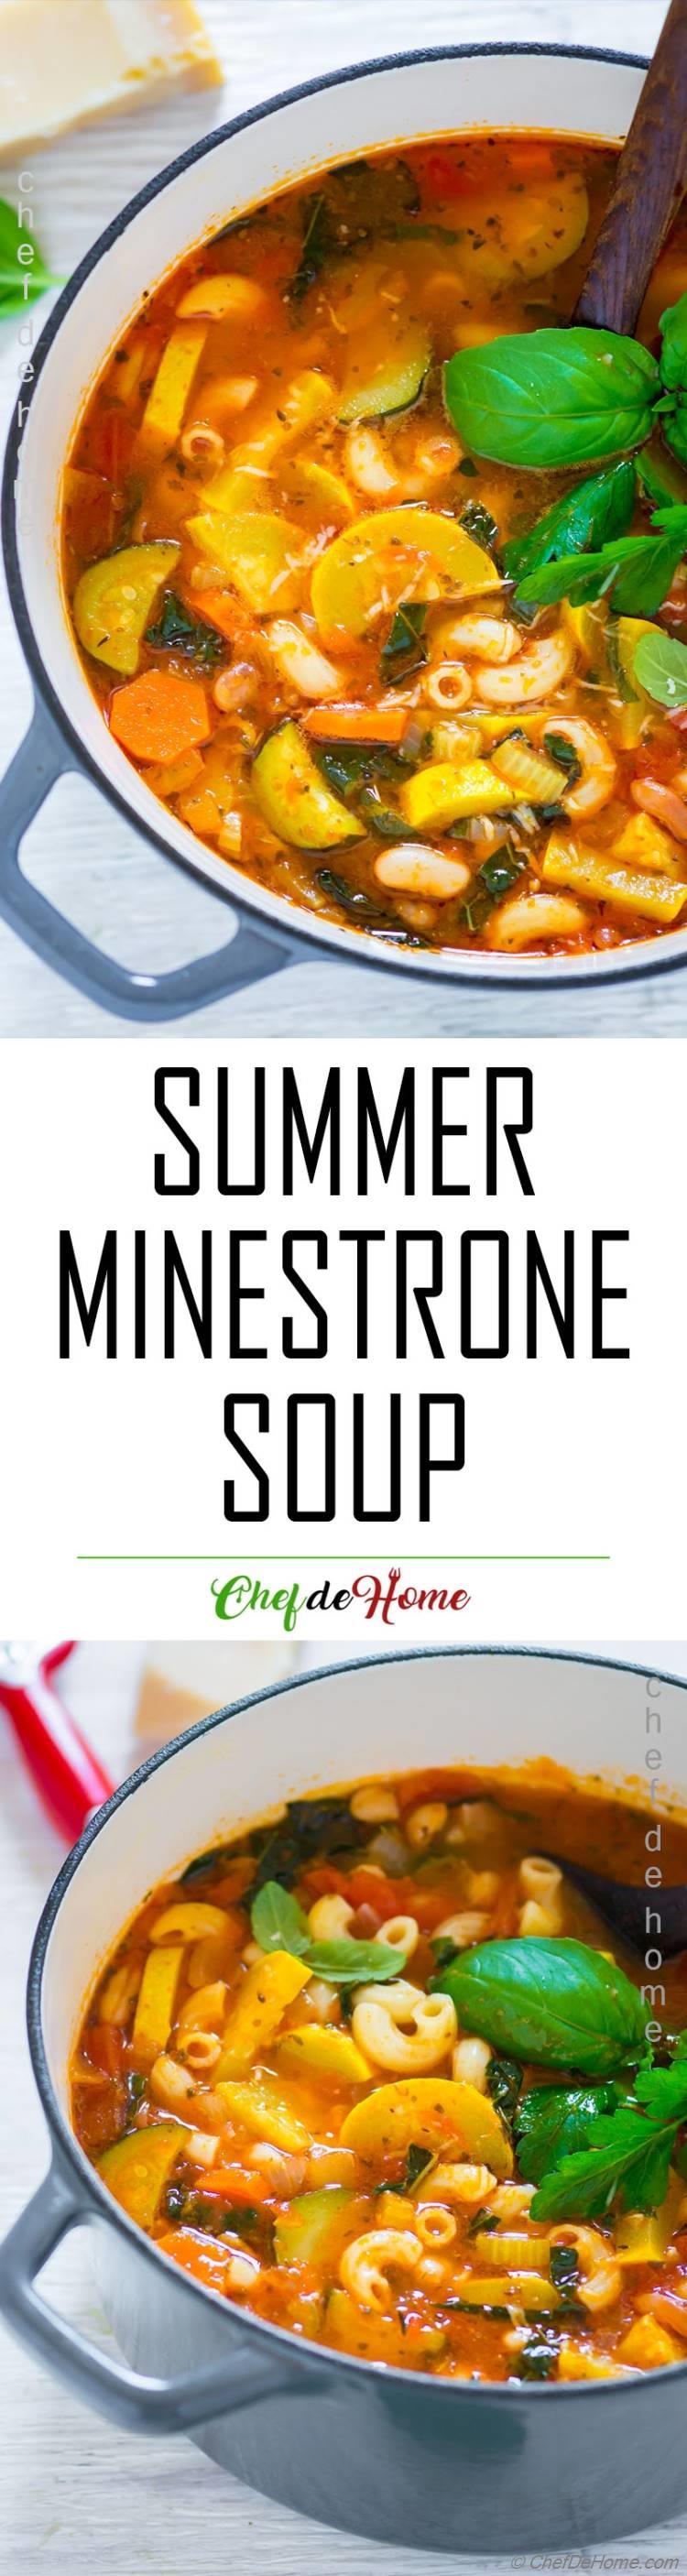 Easy Minestrone Soup with summer squash pasta and beans 